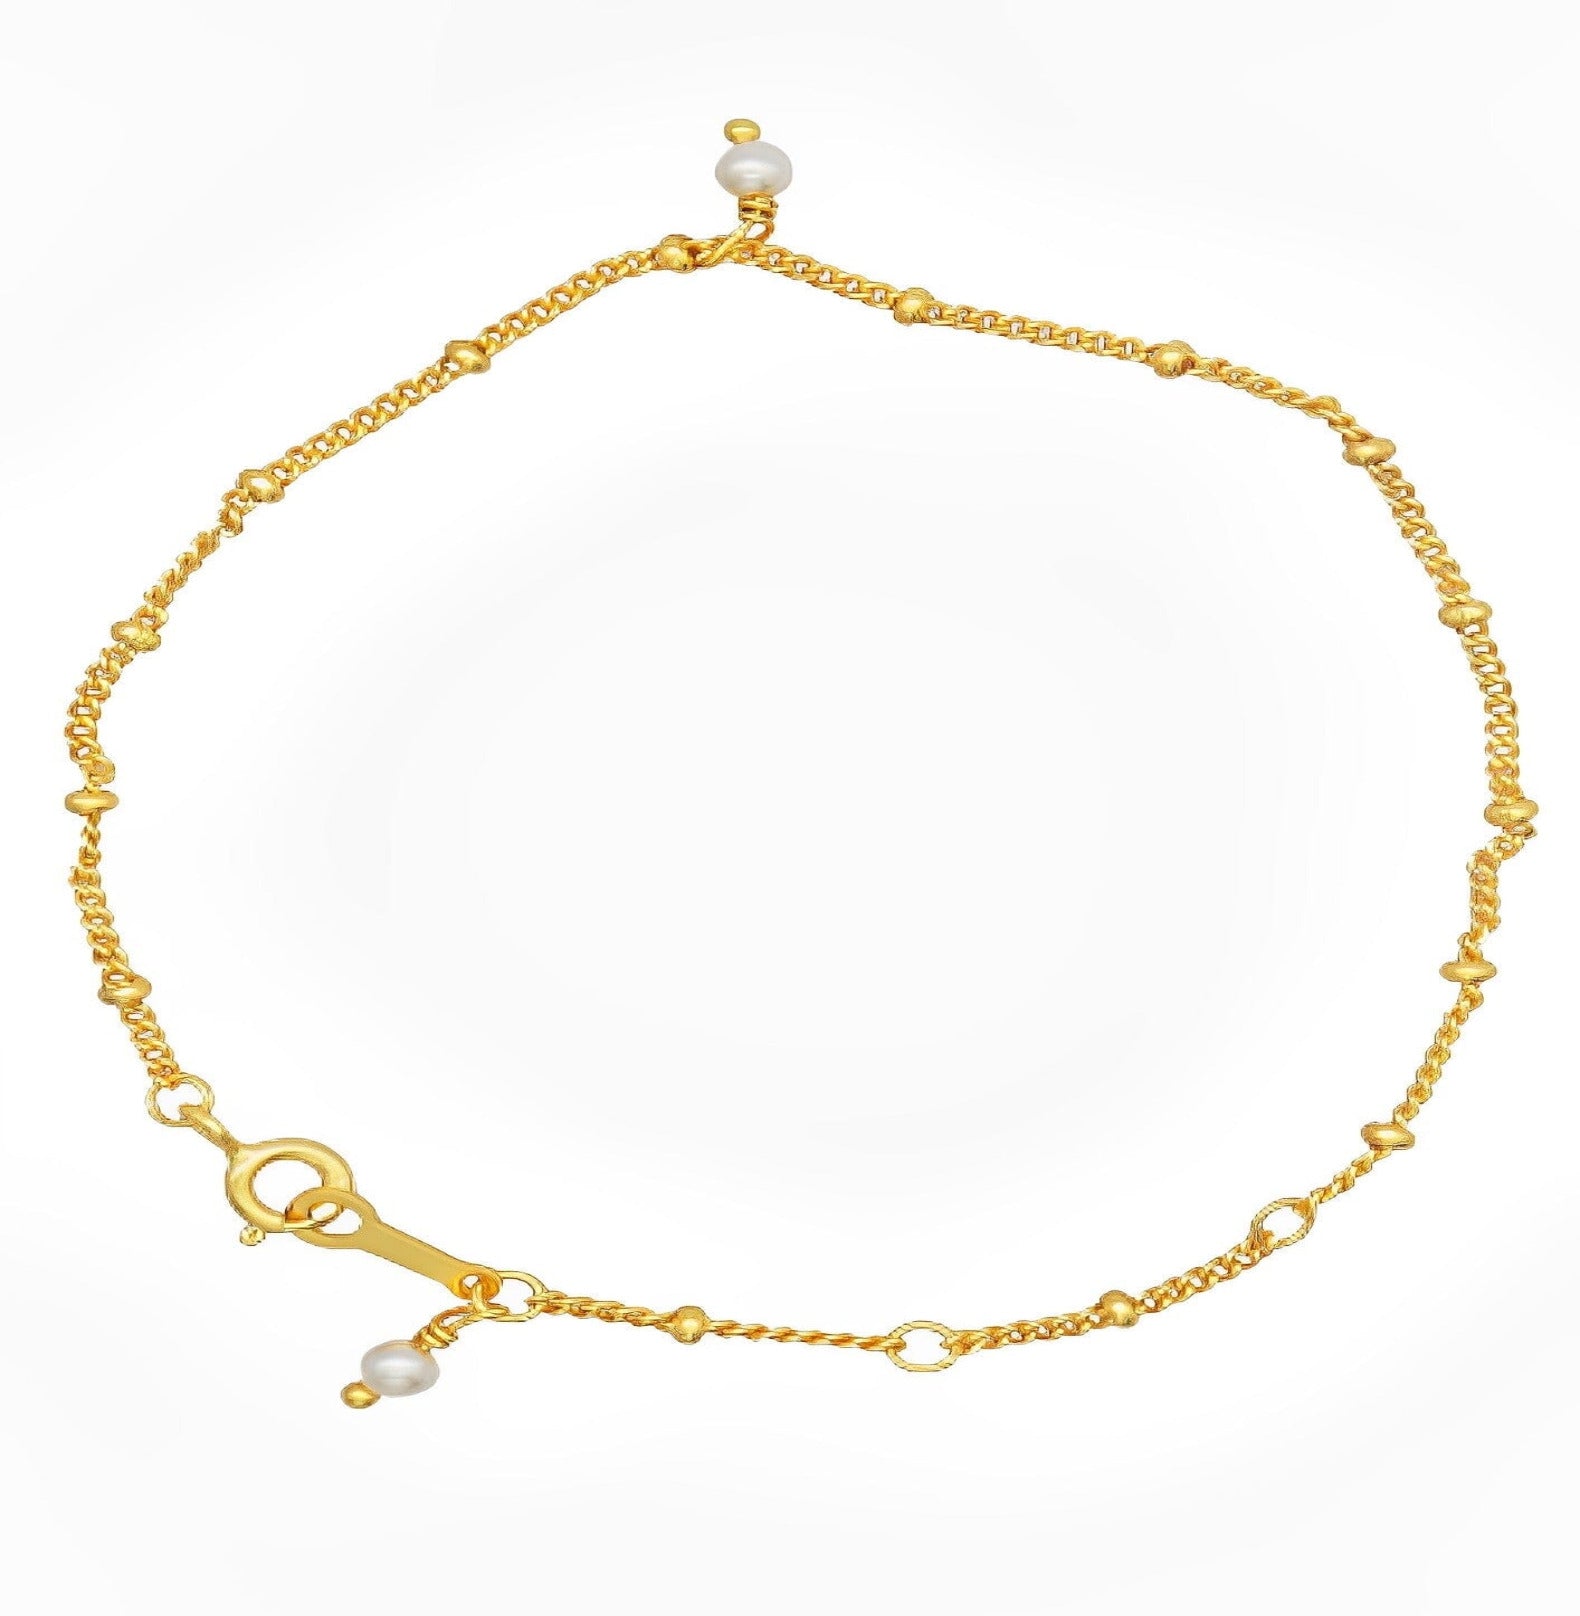 REBECCA BRACELET braclet Yubama Jewelry Online Store - The Elegant Designs of Gold and Silver ! 